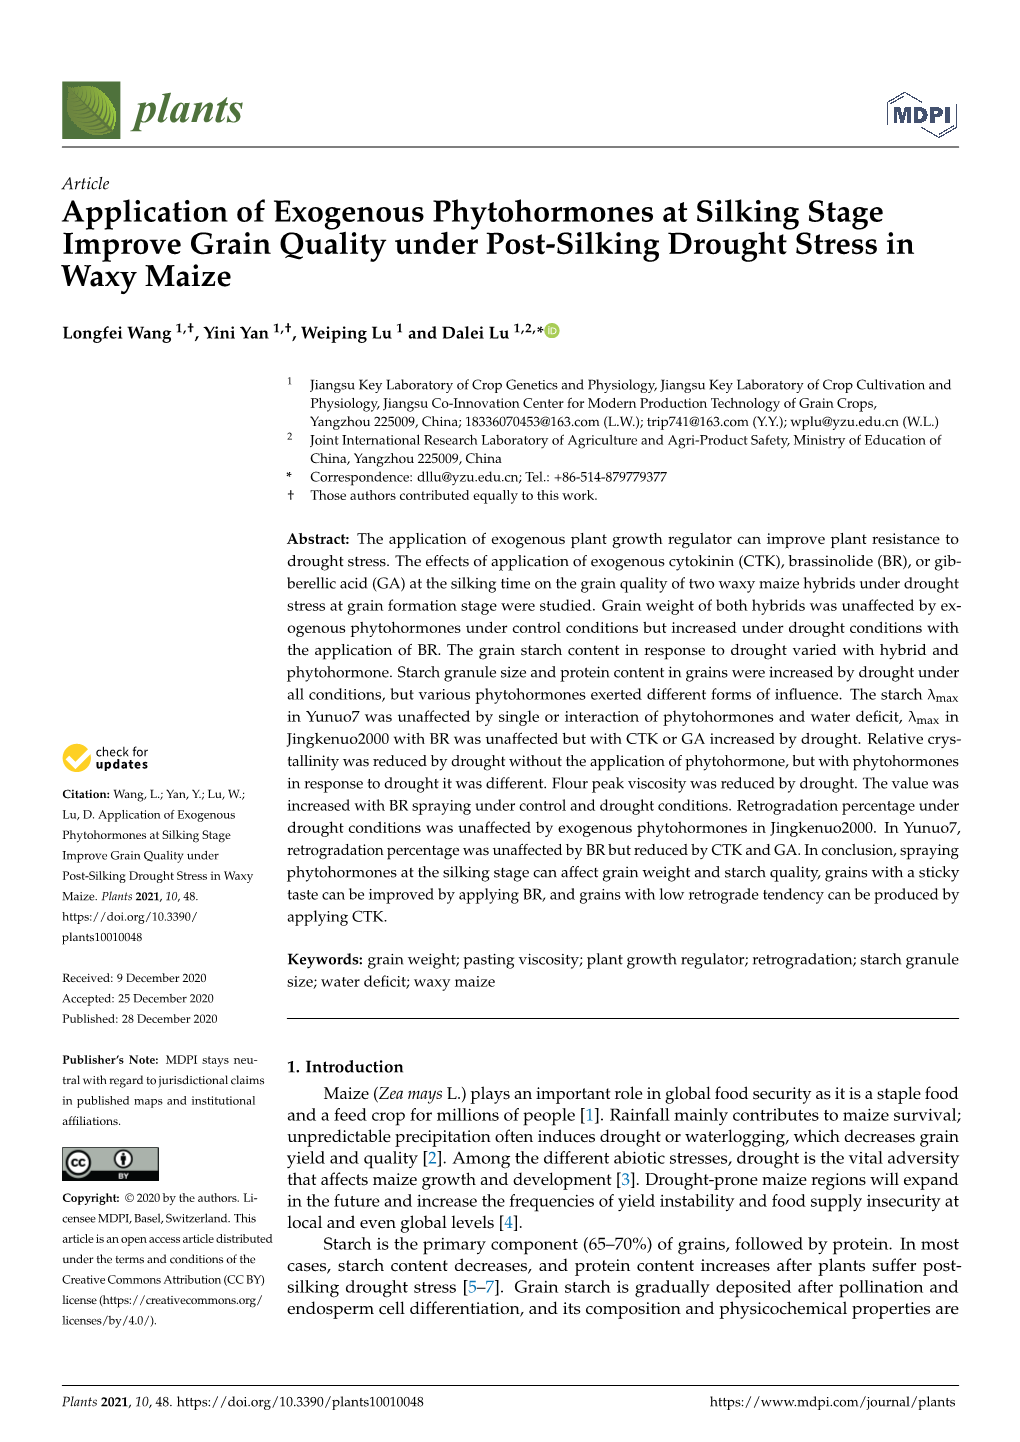 Application of Exogenous Phytohormones at Silking Stage Improve Grain Quality Under Post-Silking Drought Stress in Waxy Maize